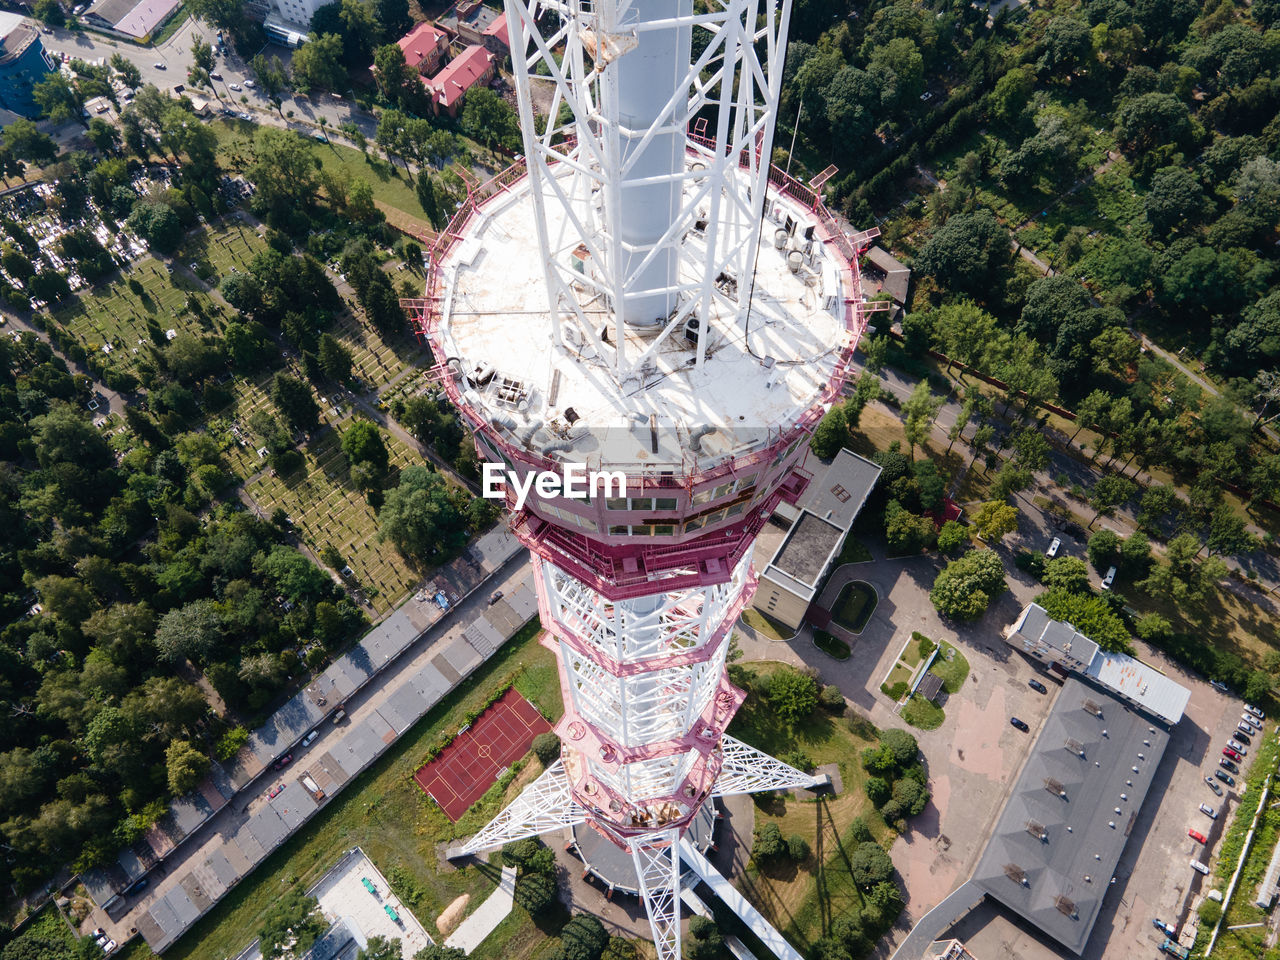 HIGH ANGLE VIEW OF FERRIS WHEEL AGAINST BUILDING